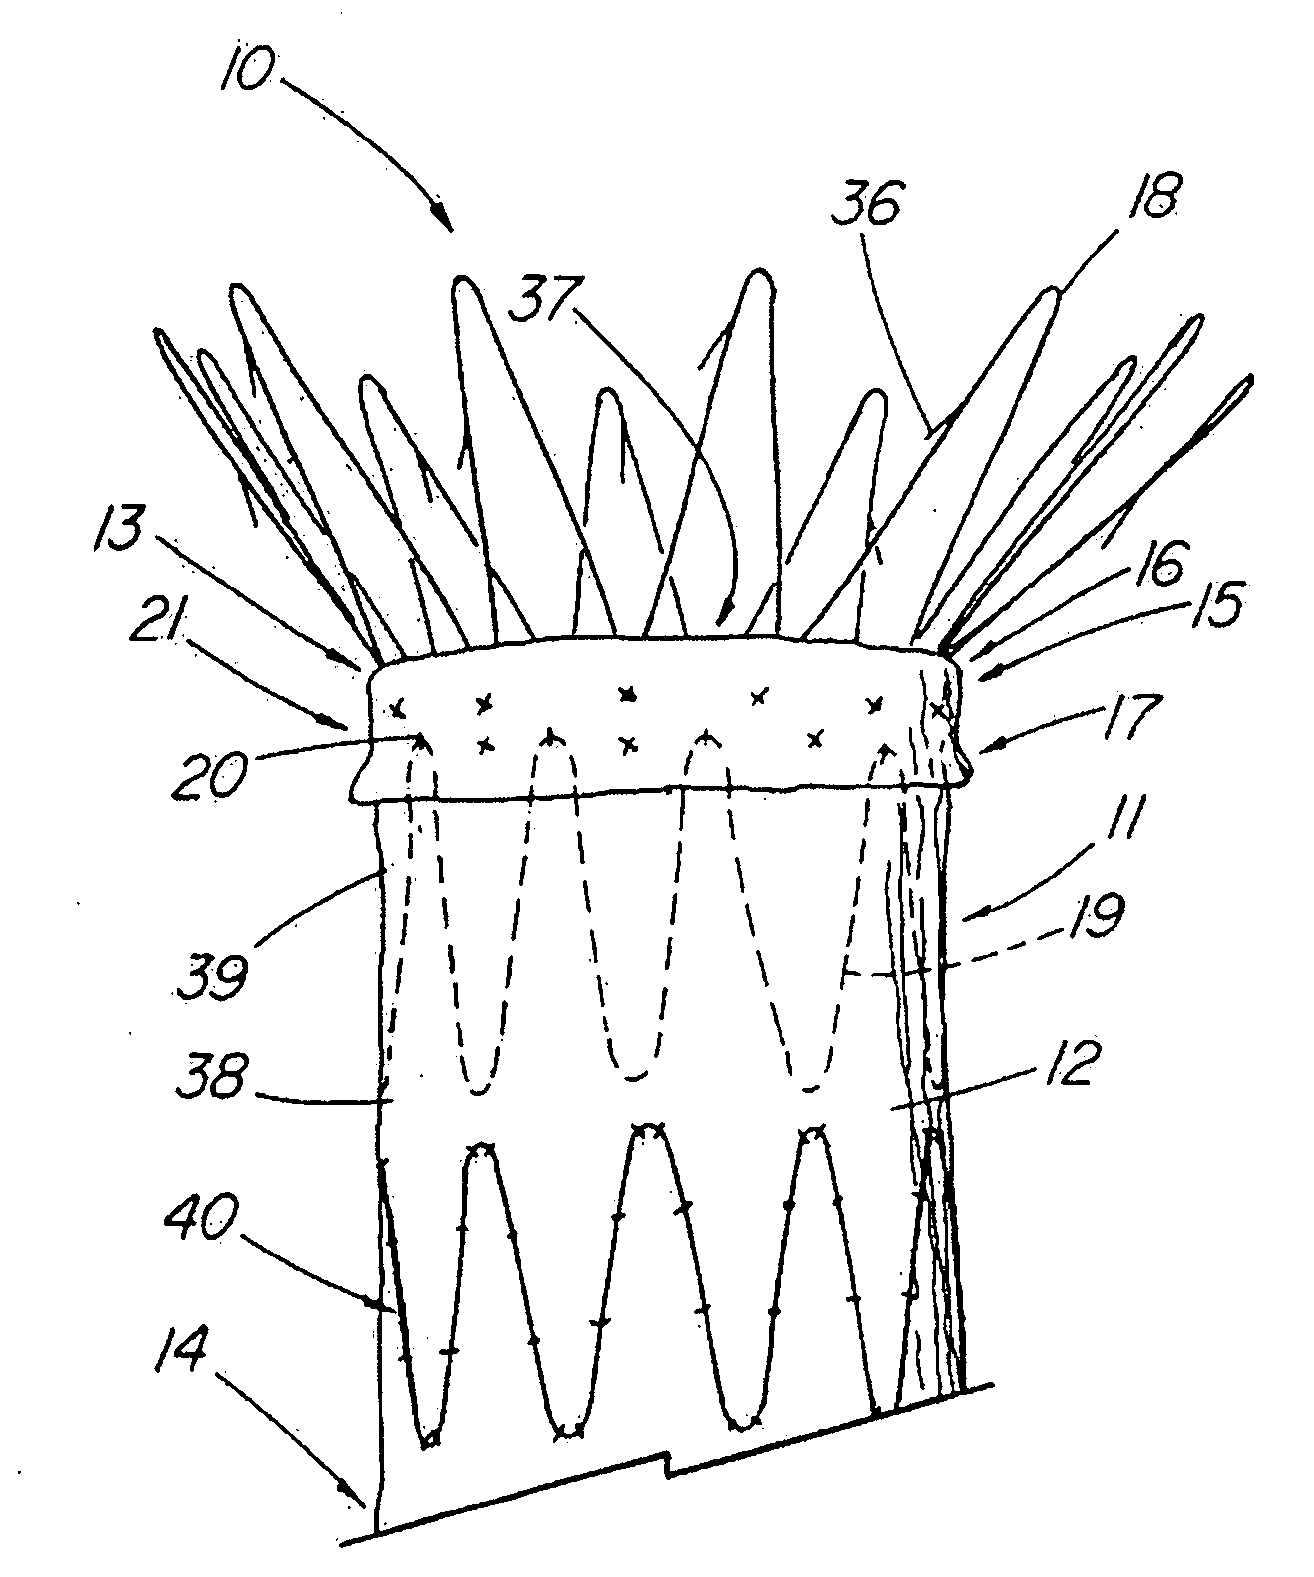 Endoluminal device with extracellular matrix material and methods